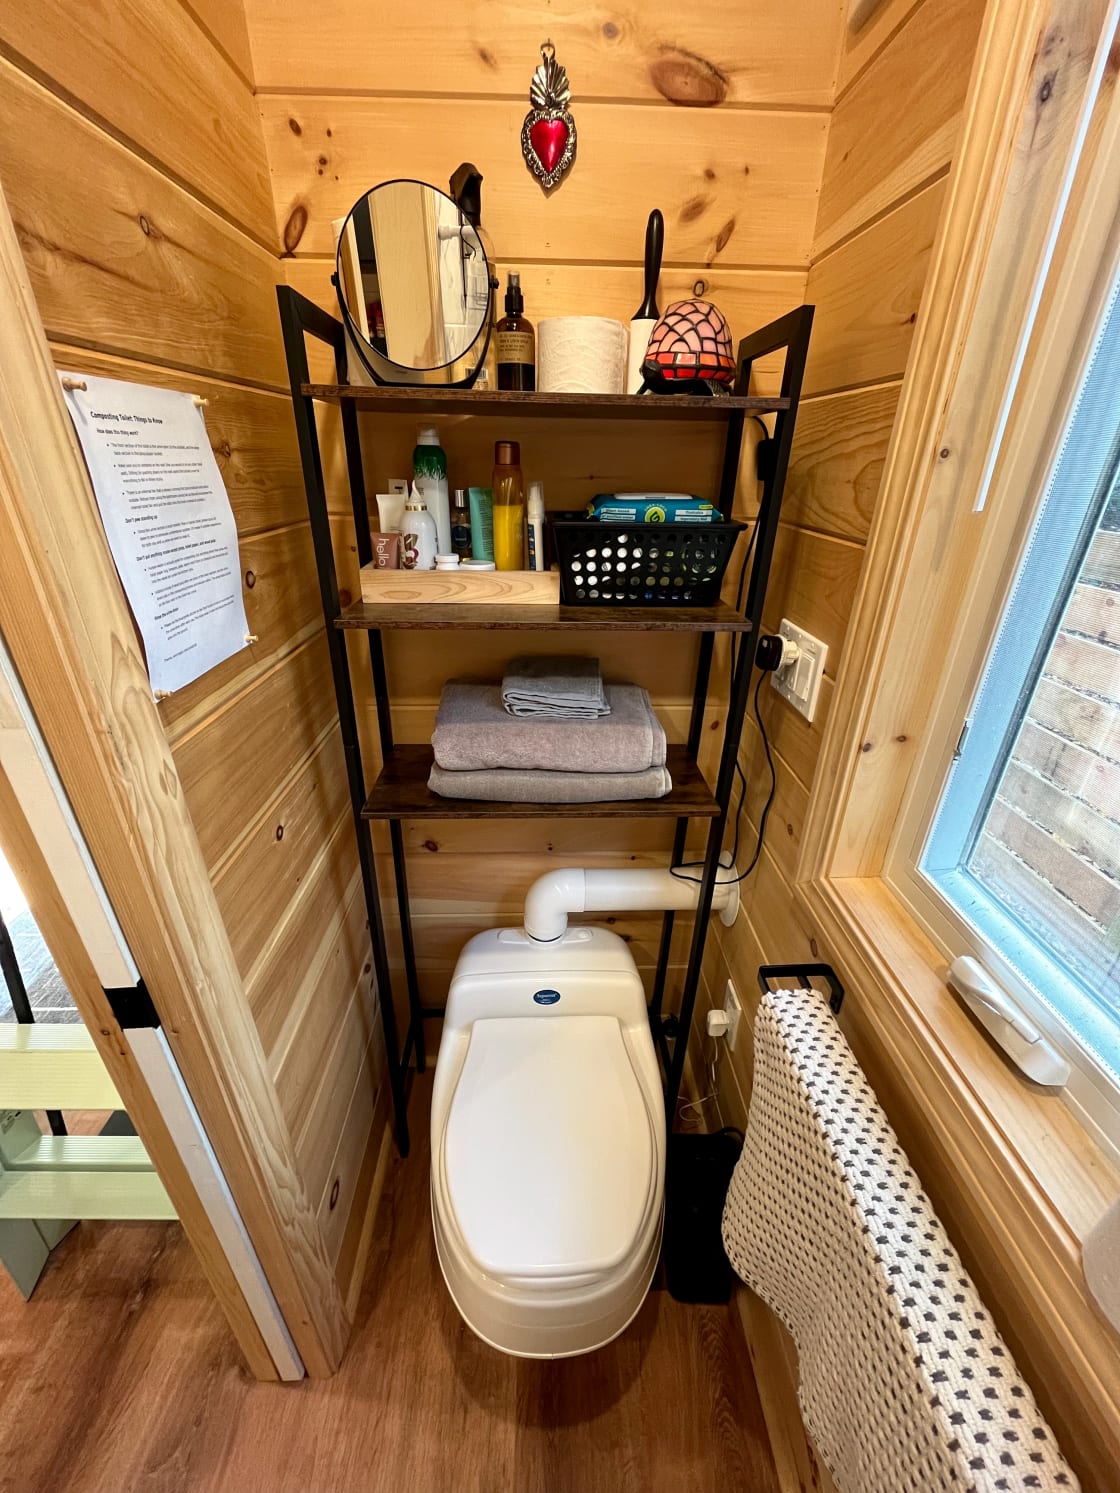 Bathroom with composting toilet